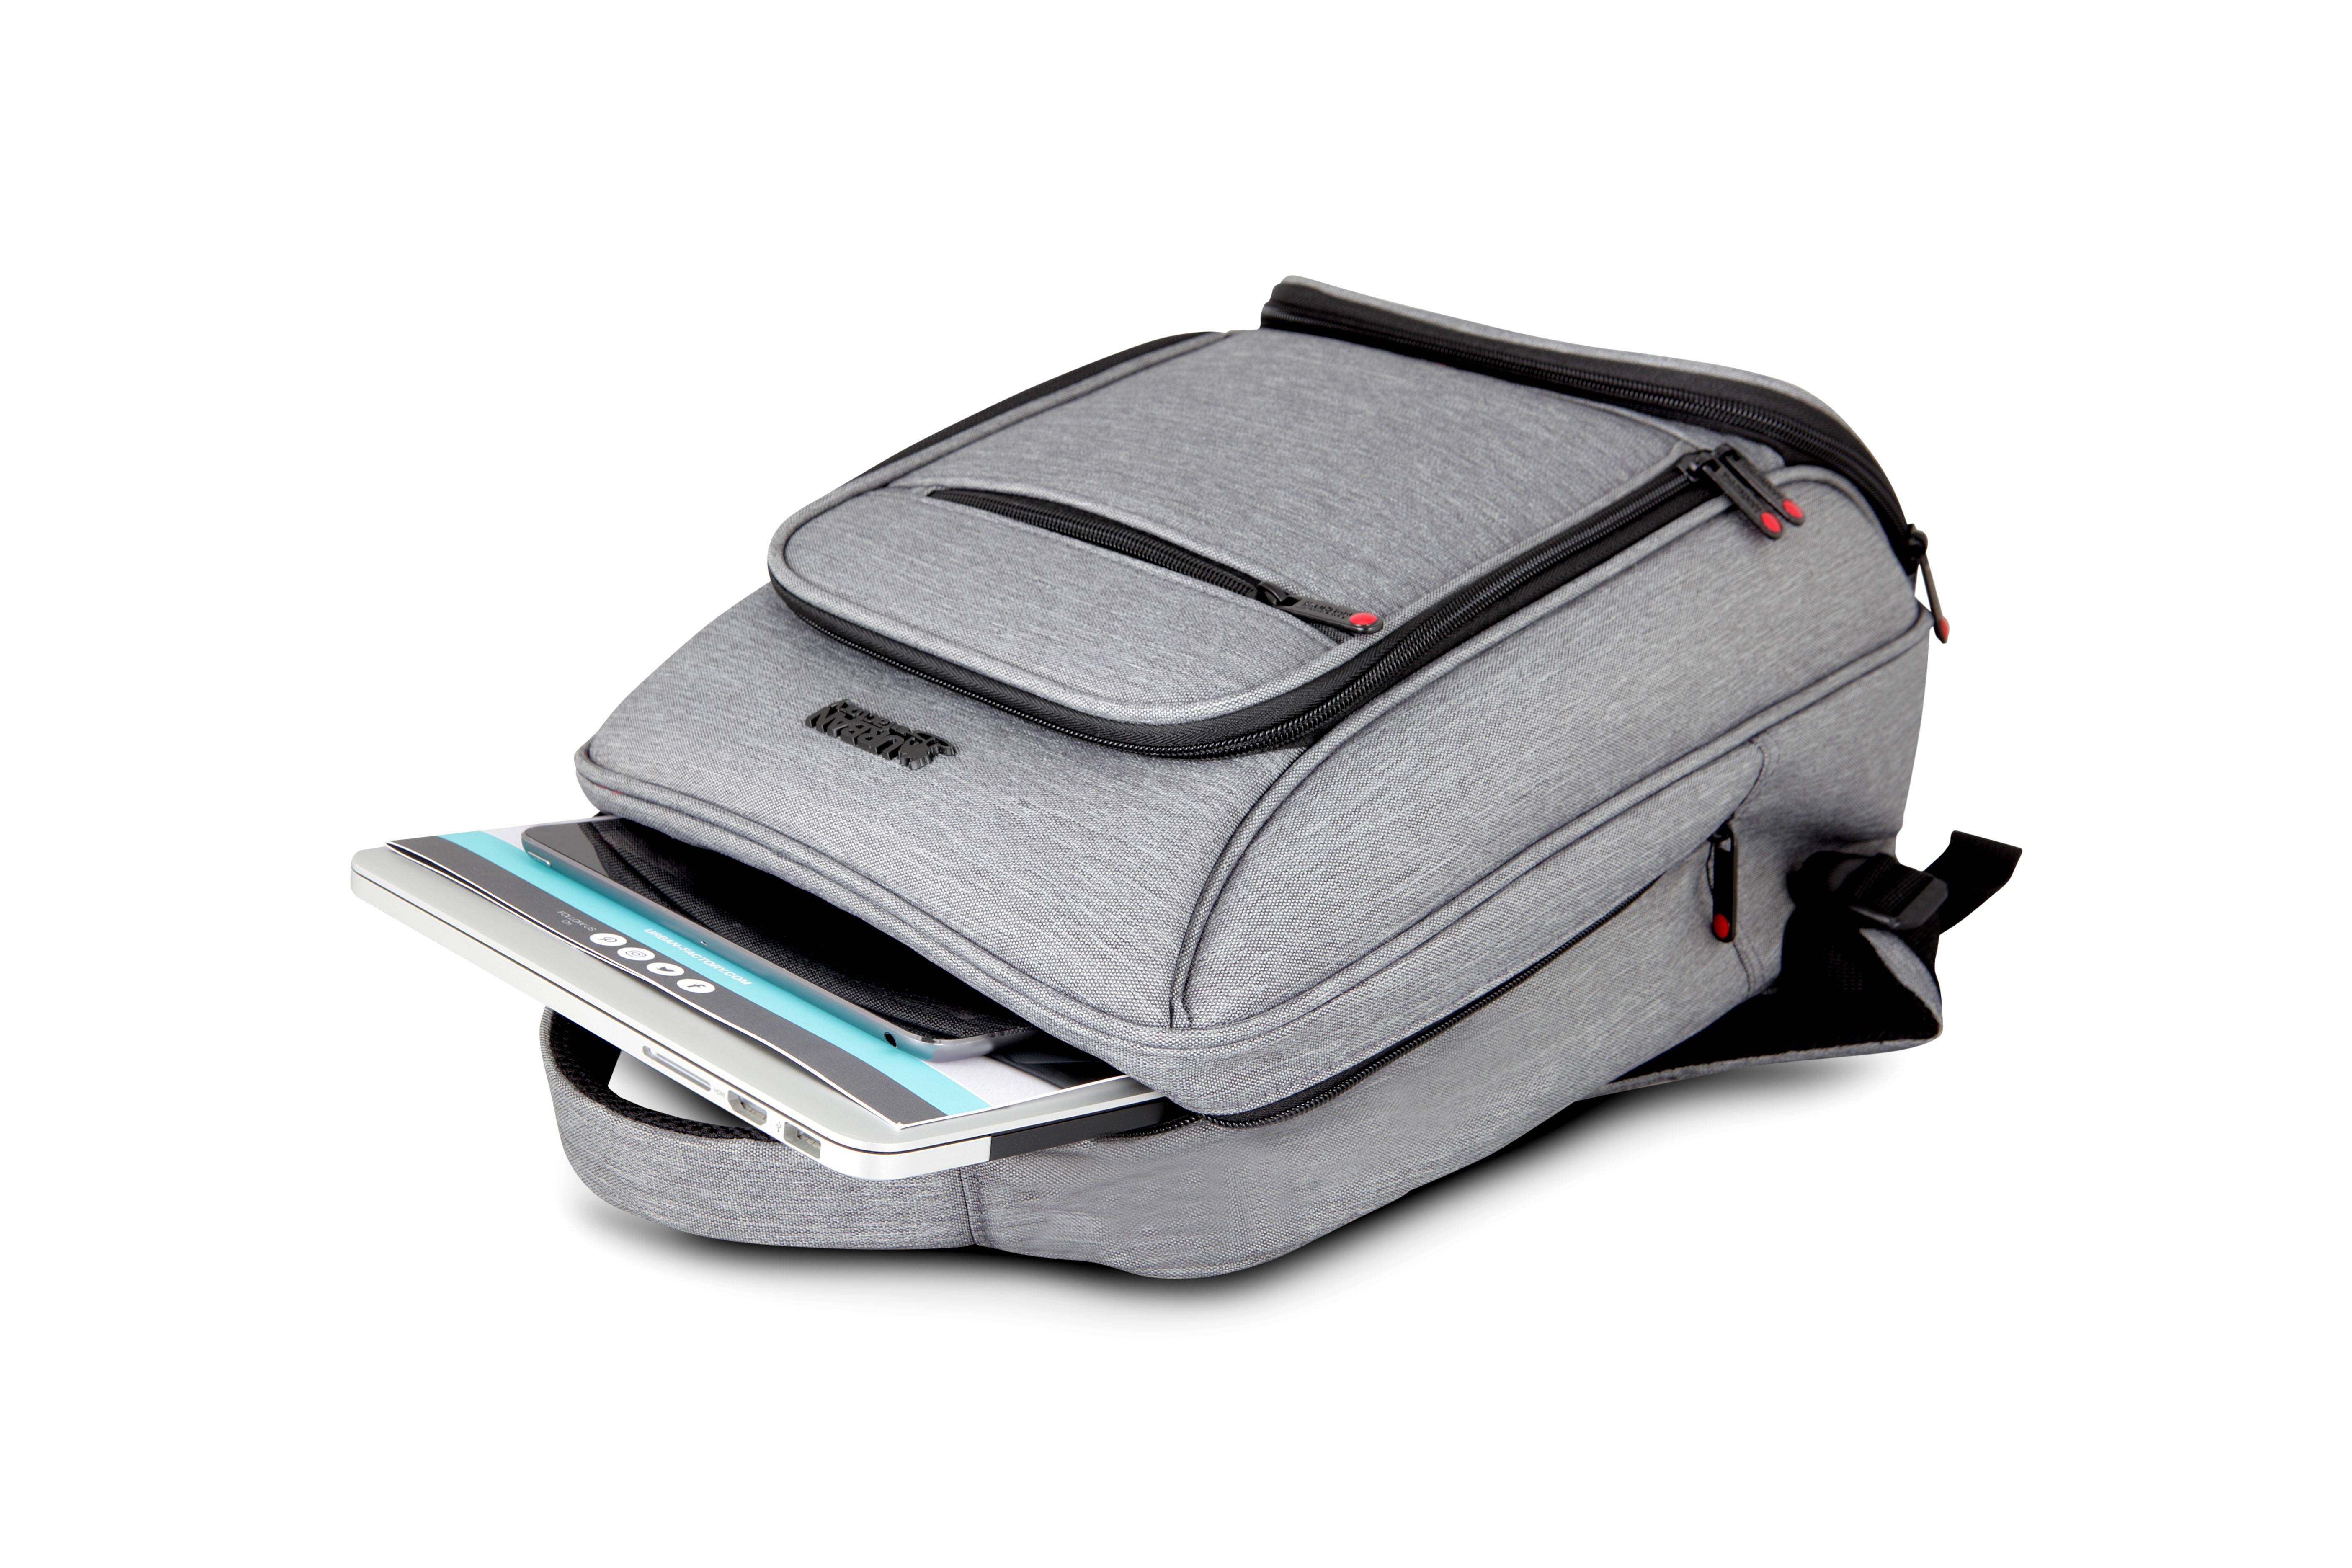 Rca Informatique - image du produit : MIXEE EDITION BACKPACK 15.6IN COMPACT